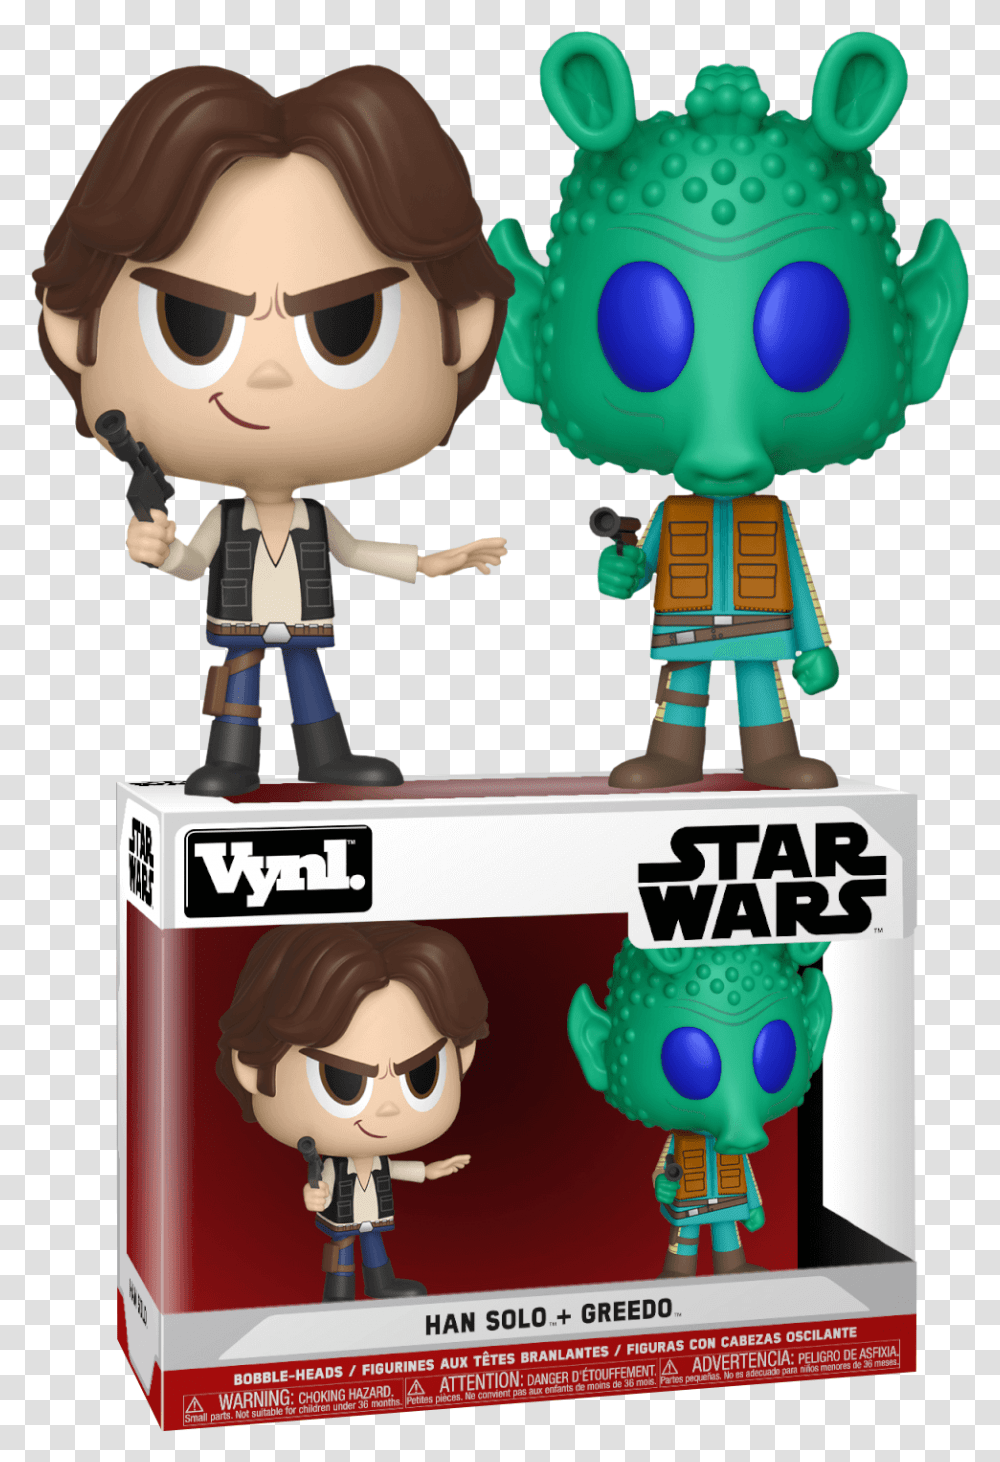 Han Solo Amp Greedo Vynl Vynl Han Solo Greedo, Doll, Toy, Robot Transparent Png